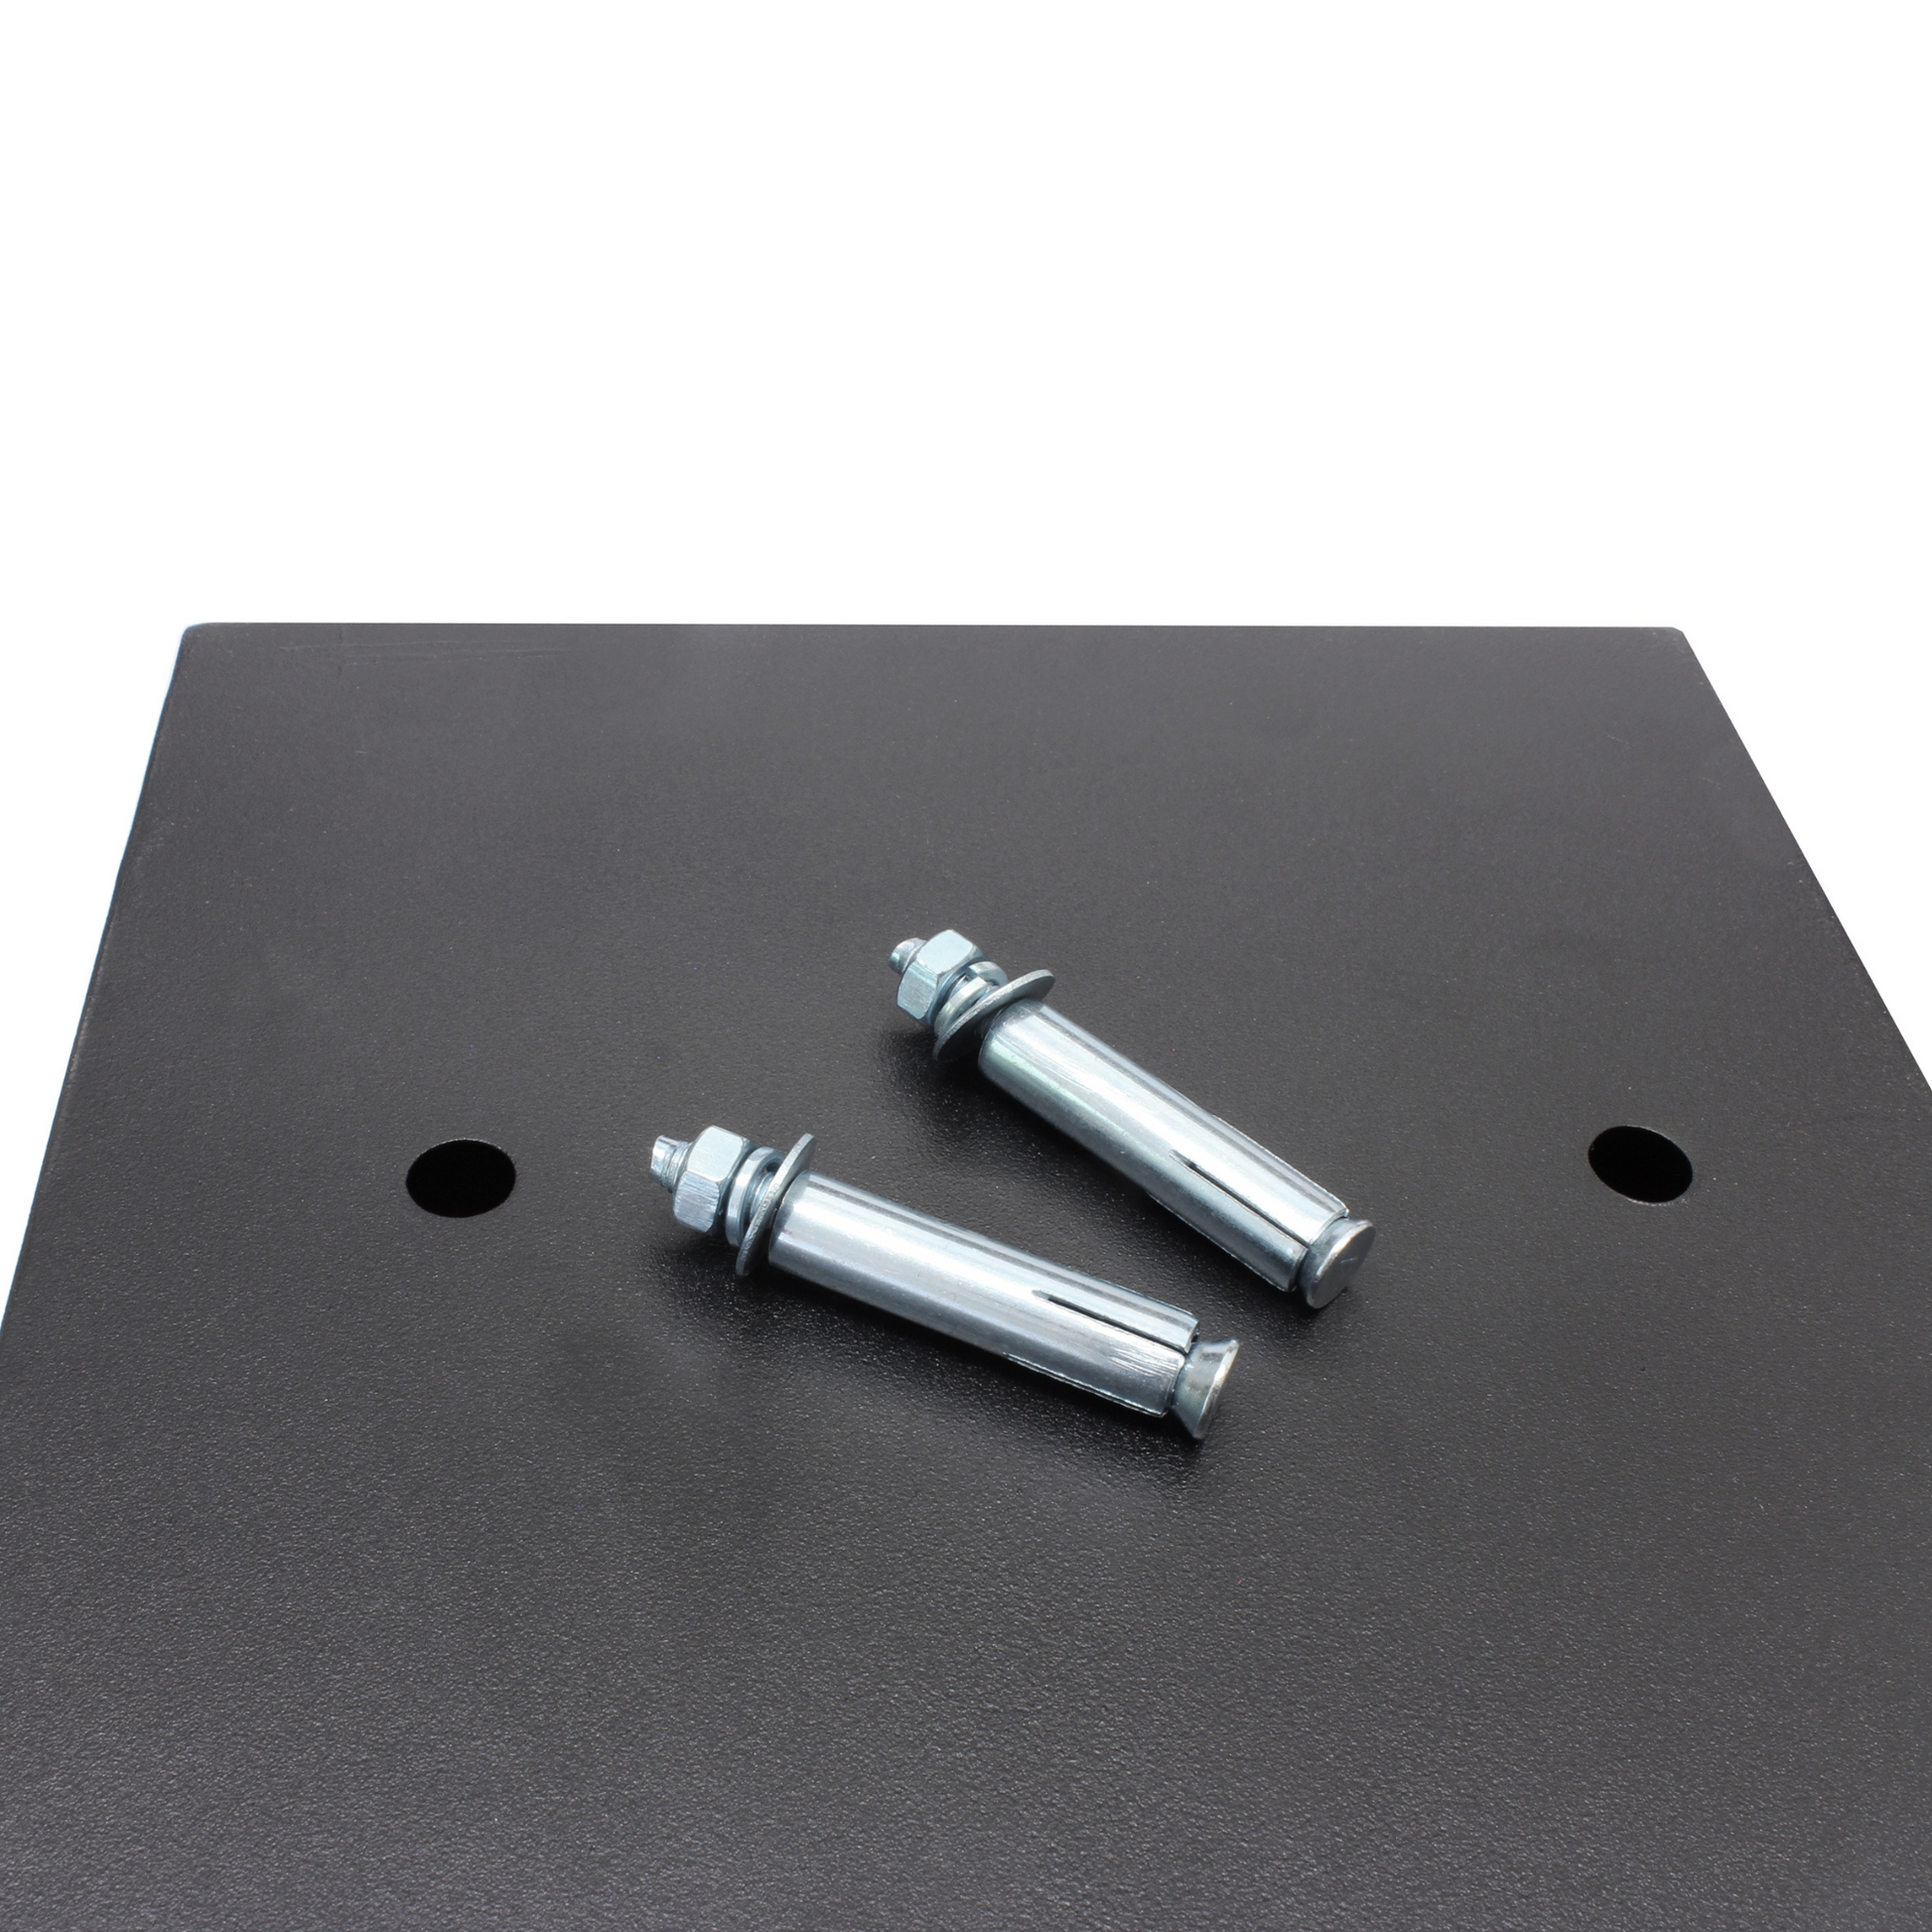 Two metal bolts rest on the black surface of the surface of the Cathedral Products EA15 5 Litre Electronic Digital Safe, next to pre-drilled mounting holes for secure installation.